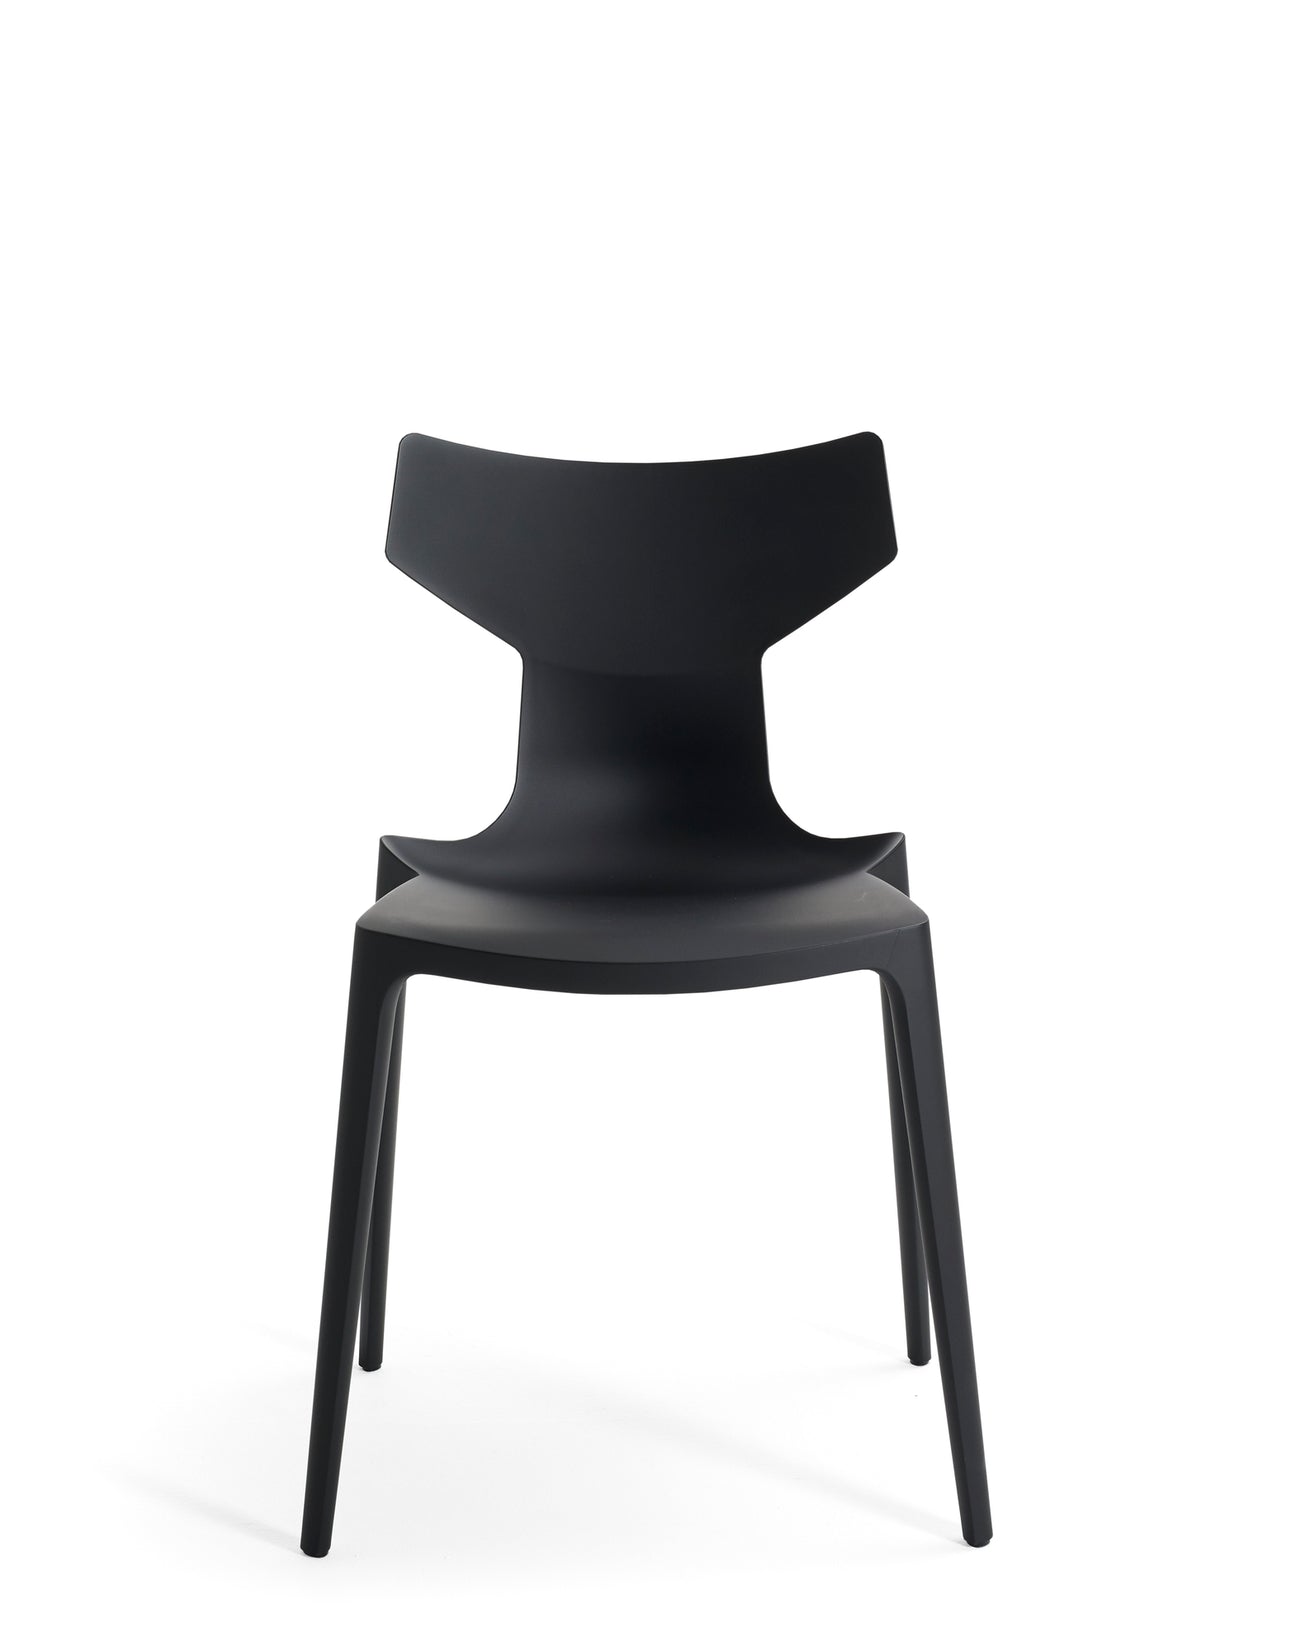 RE-CHAIR POWERED BY ILLY (2 SEDIE)